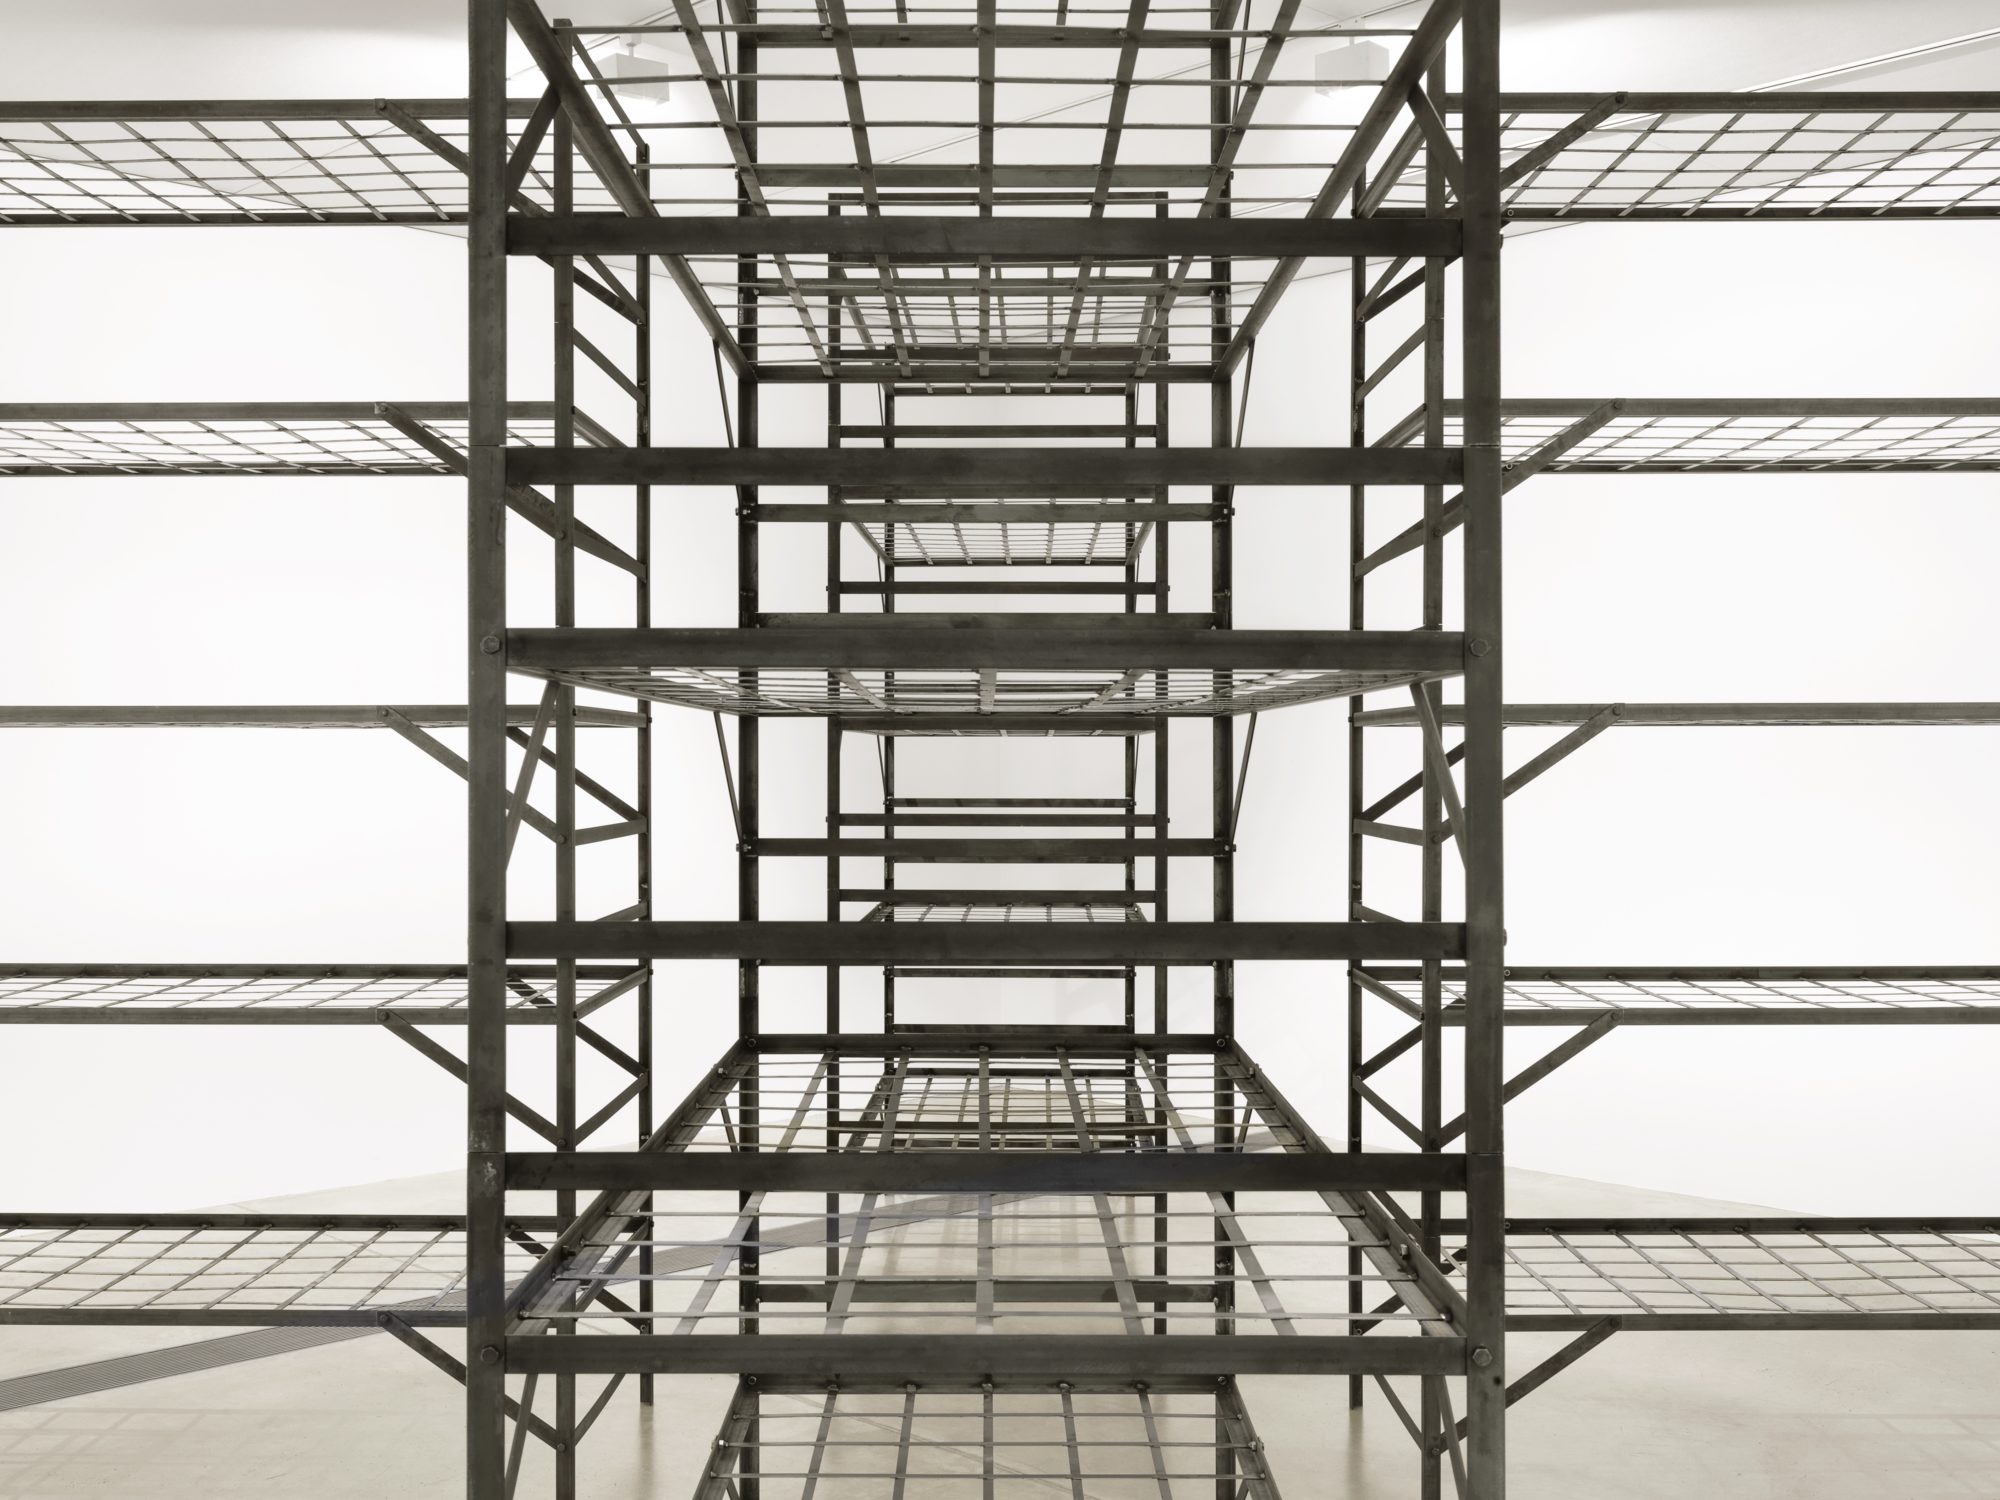 Close-up photo of steel shelf structures taken at eye-level